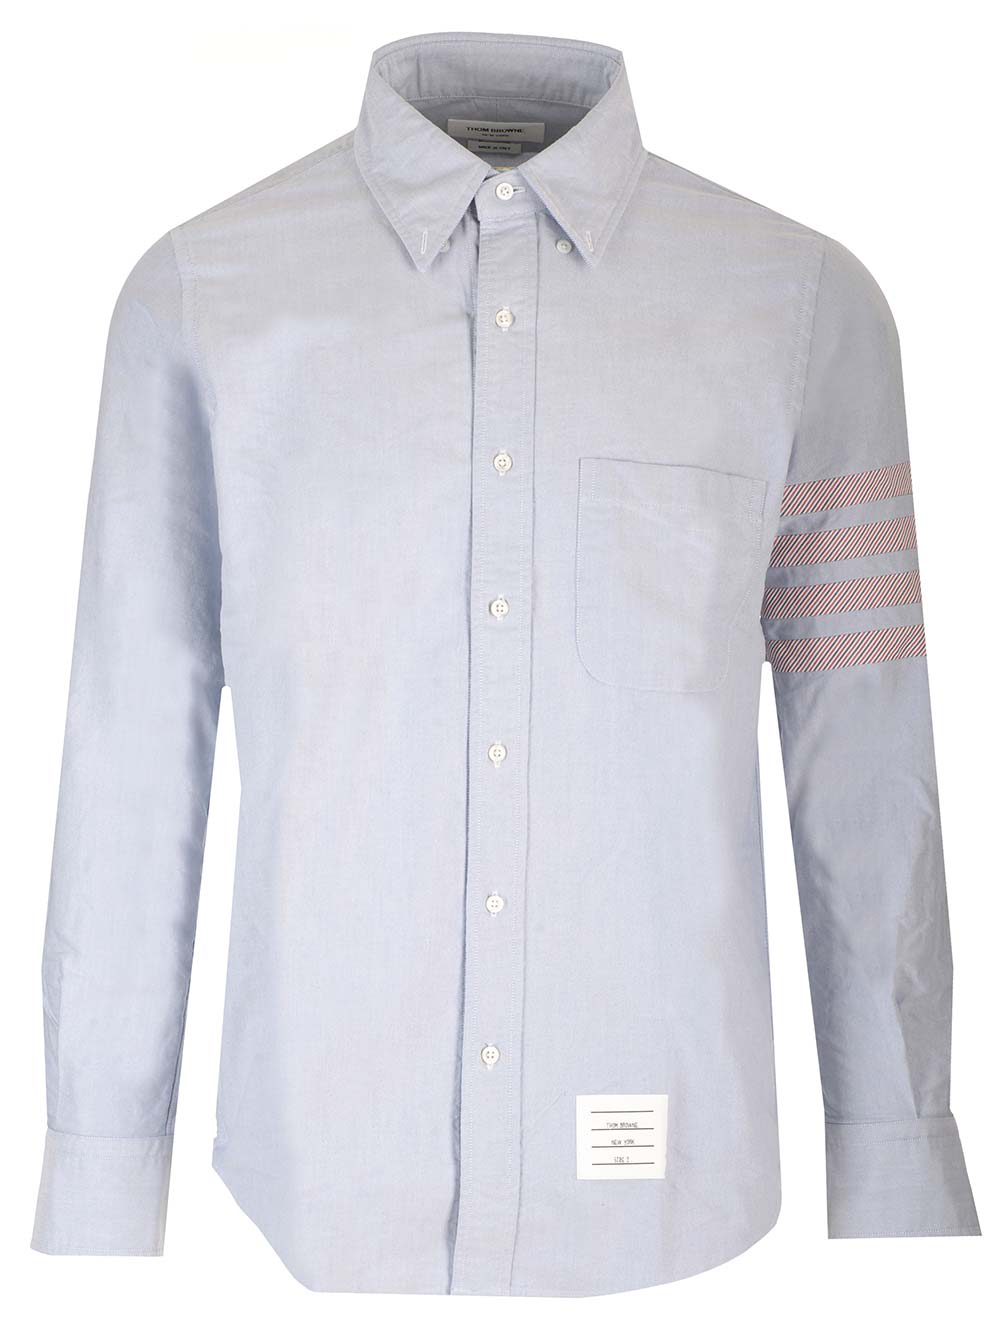 THOM BROWNE LIGHT BLUE BUTTON-DOWN SHIRT WITH 4 BARS